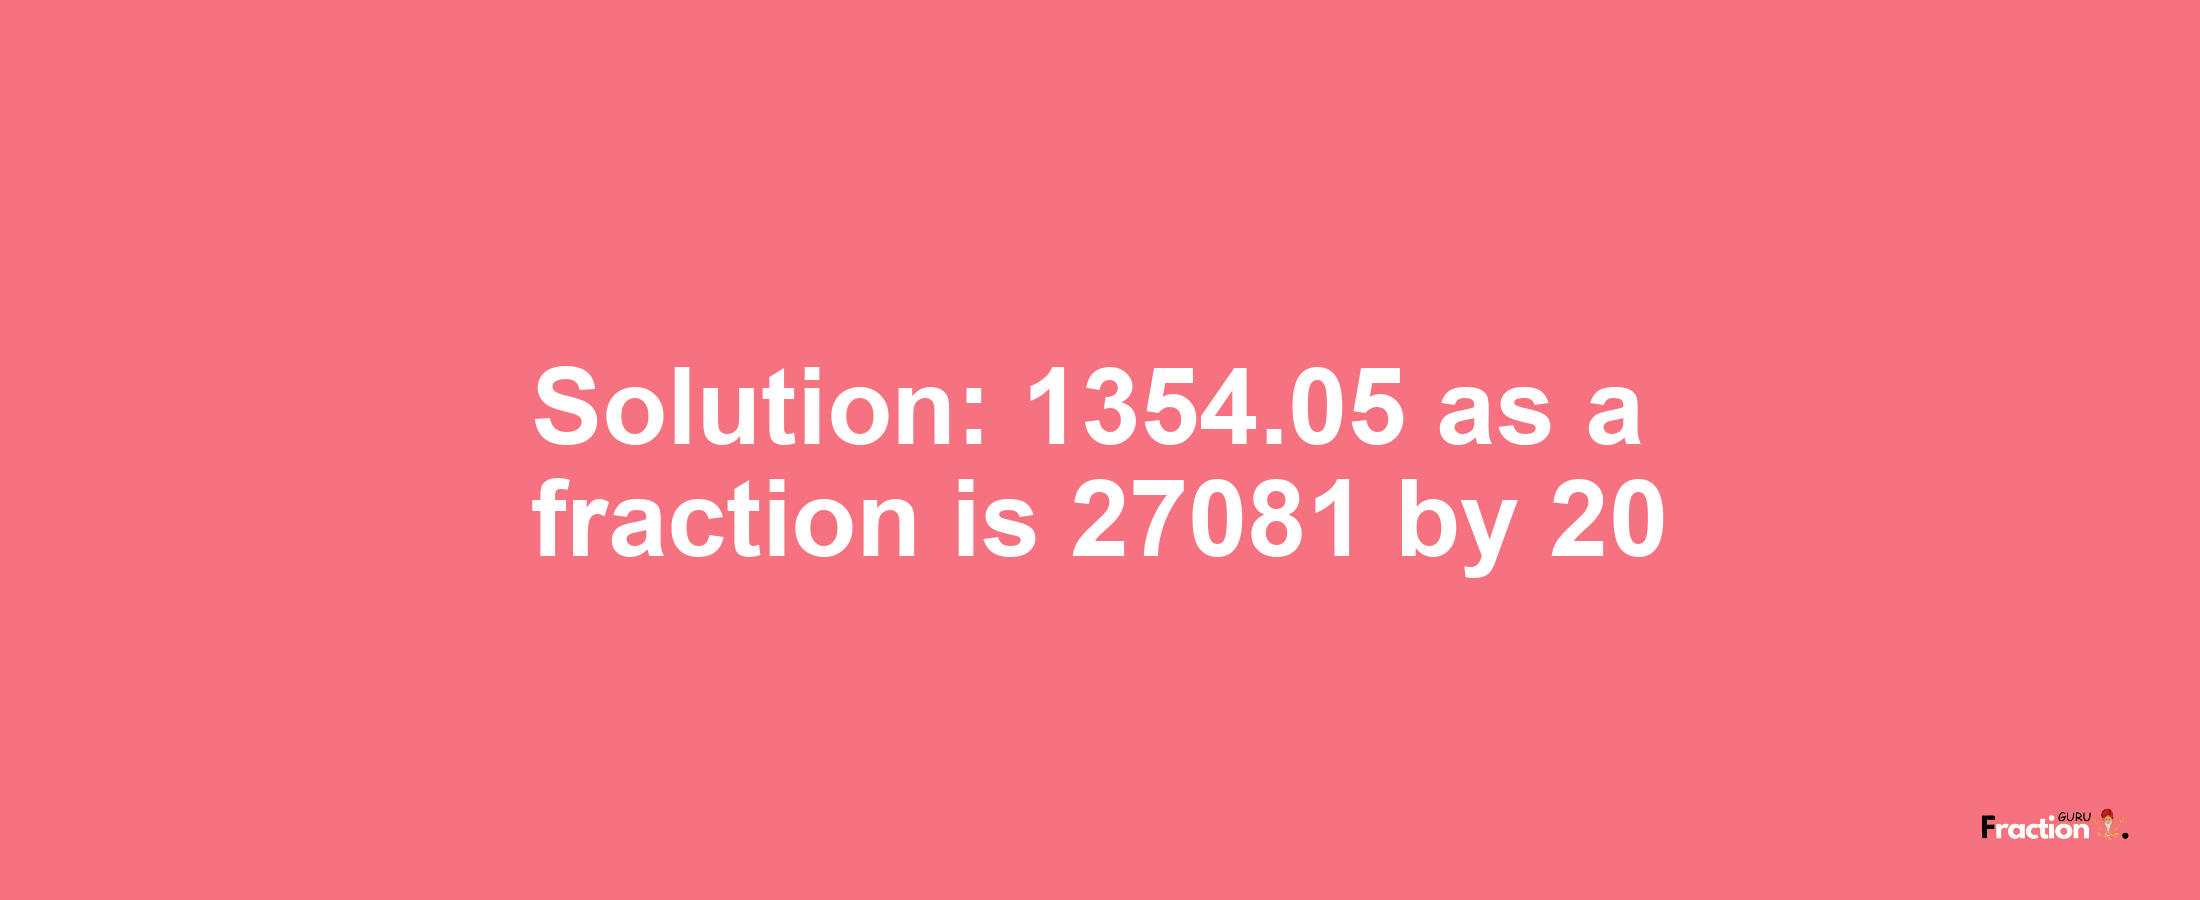 Solution:1354.05 as a fraction is 27081/20